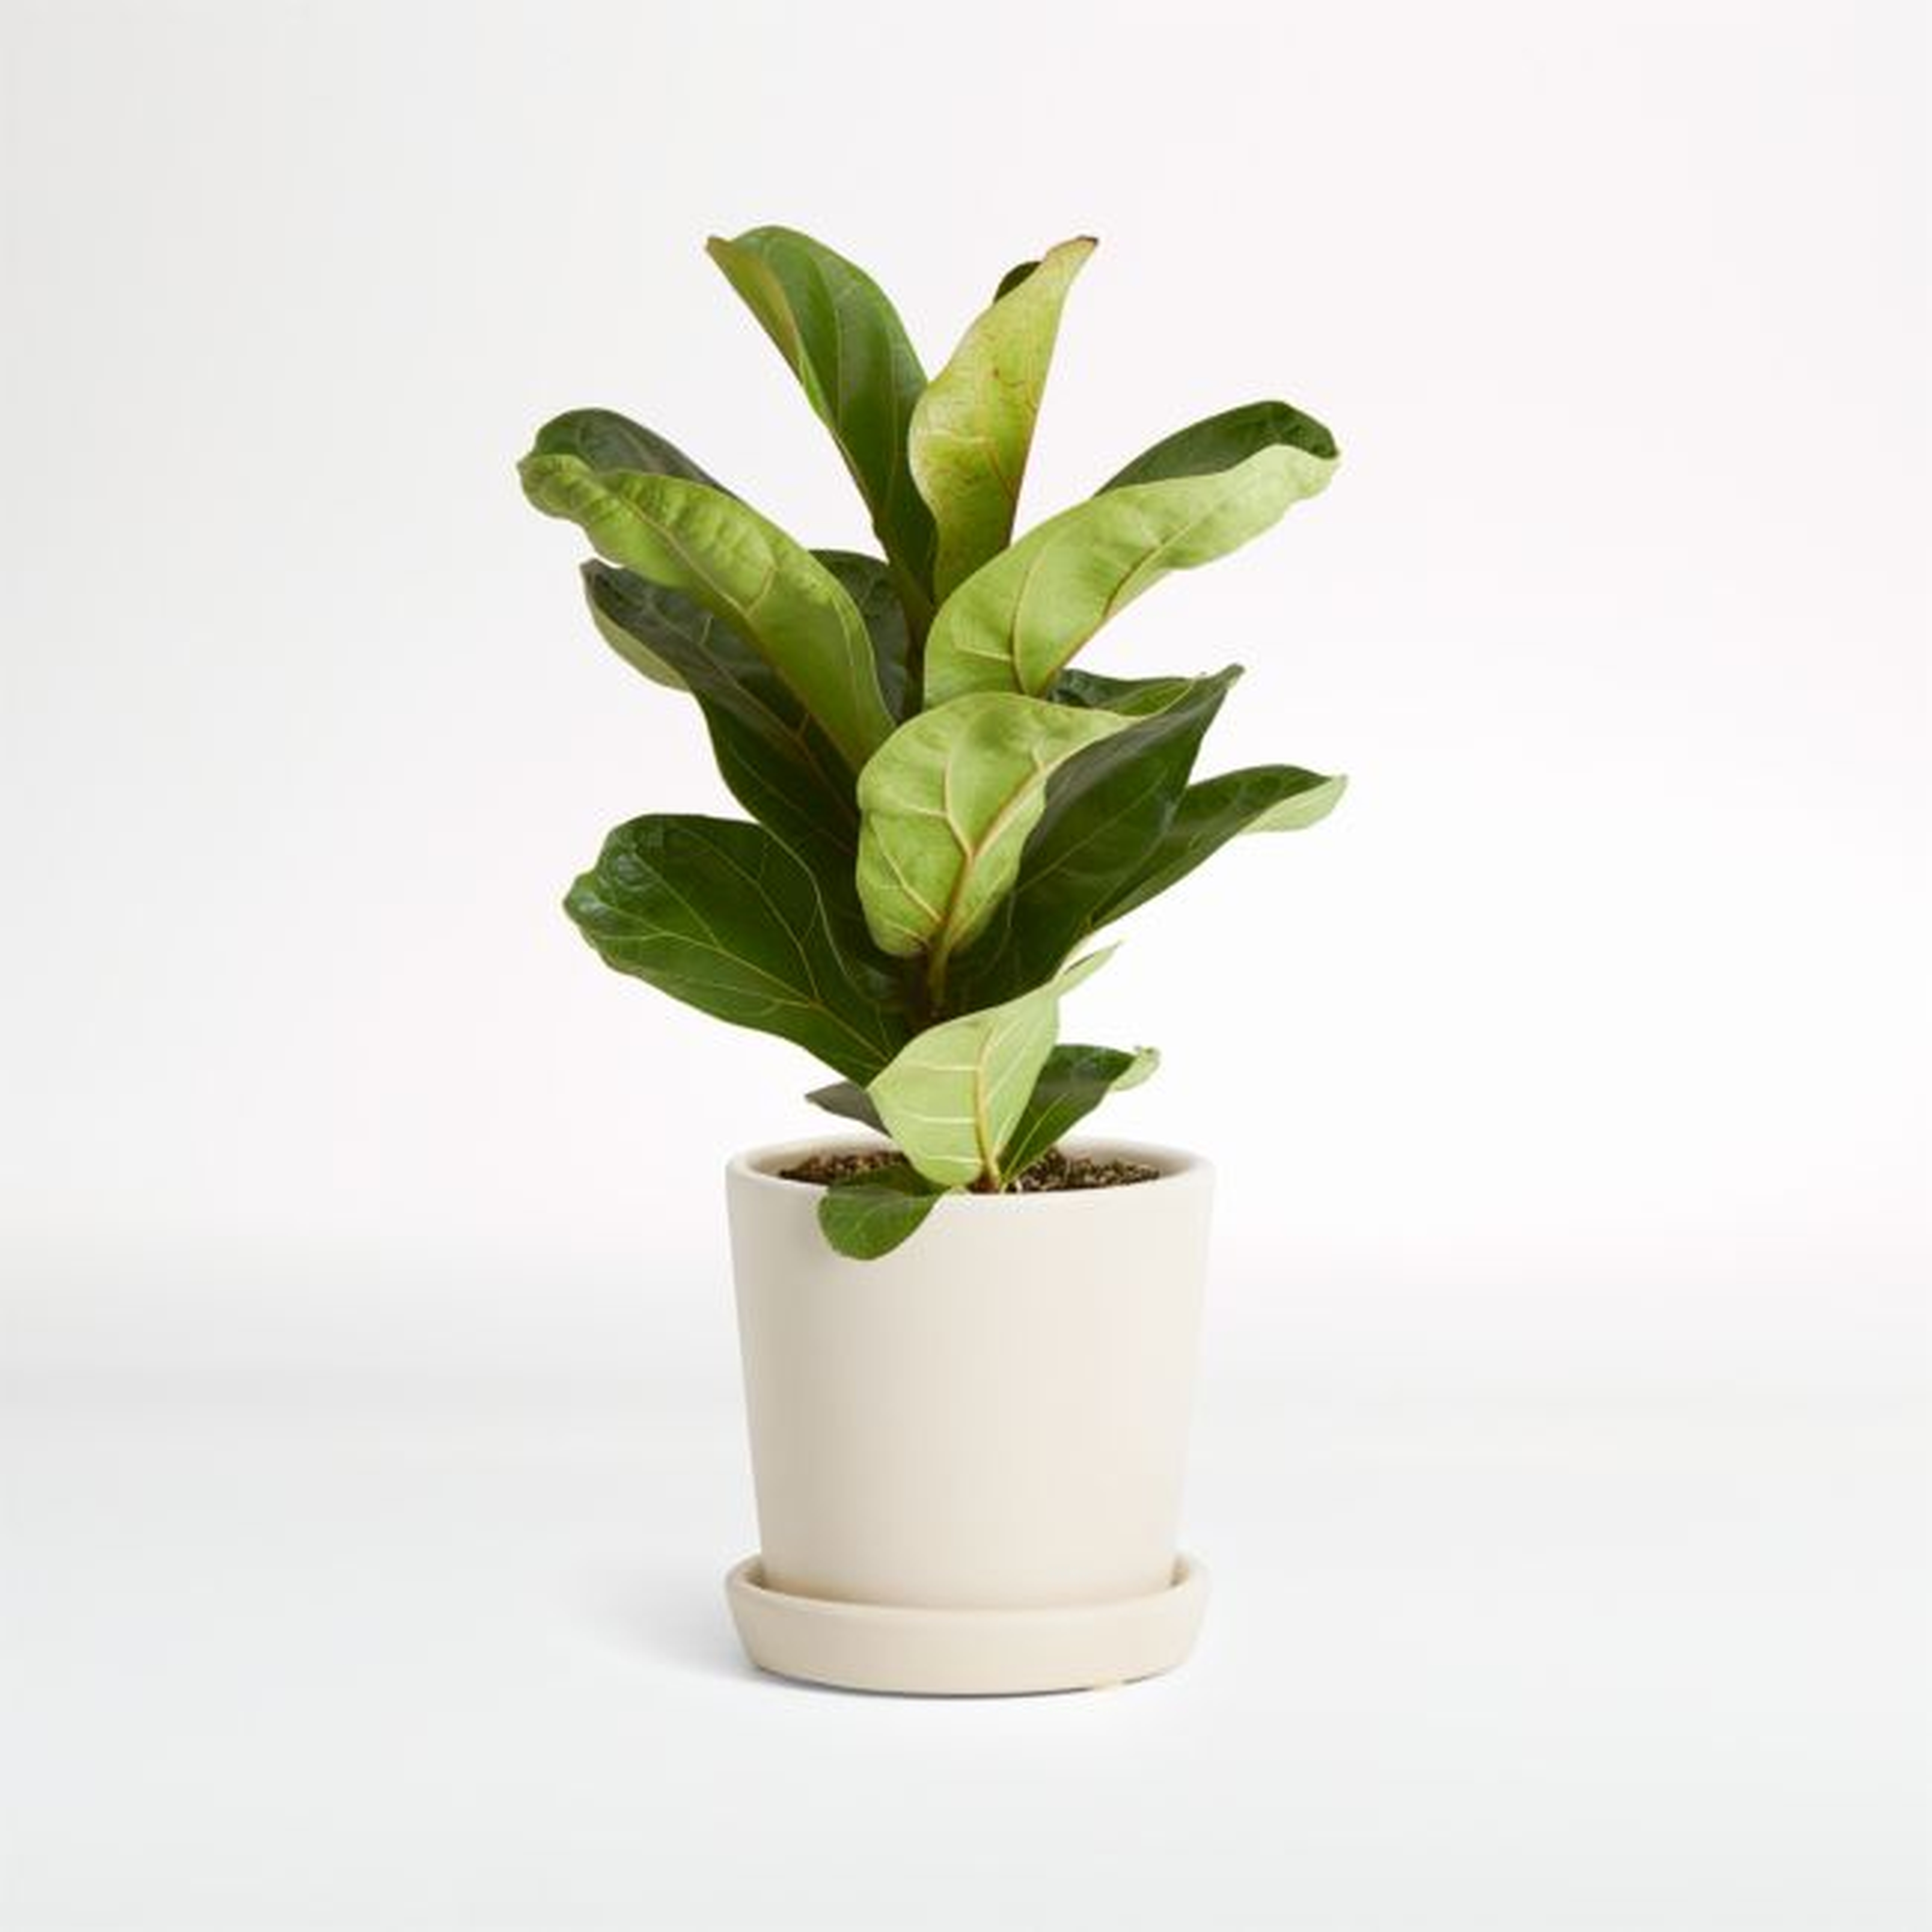 Live Fiddle Leaf Fig Plant in Bryant Planter by The Sill - Crate and Barrel